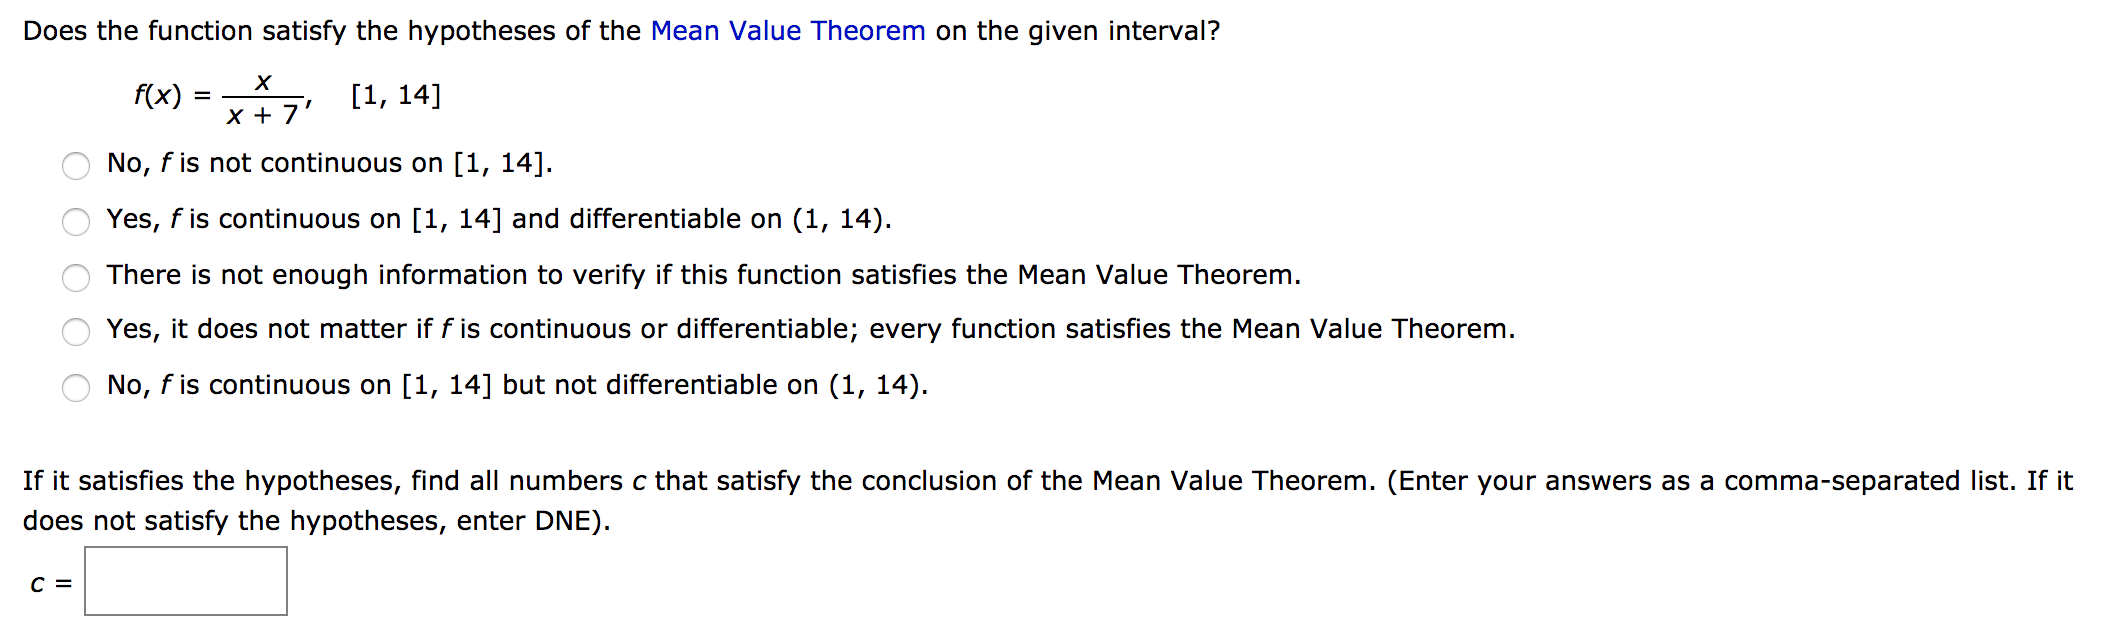 Does the function satisfy the hypotheses of the Mean Value Theorem on the given interval?
f(x) = 7 [1, 14]
X +
No, f is not continuous on [1, 14].
Yes, f is continuous on [1, 14] and differentiable on (1, 14).
There is not enough information to verify if this function satisfies the Mean Value Theorem.
Yes, it does not matter if f is continuous or differentiable; every function satisfies the Mean Value Theorem.
No, f is continuous on [1, 14] but not differentiable on (1, 14).
If it satisfies the hypotheses, find all numbers c that satisfy the conclusion of the Mean Value Theorem. (Enter your answers as a comma-separated list. If it
does not satisfy the hypotheses, enter DNE).
